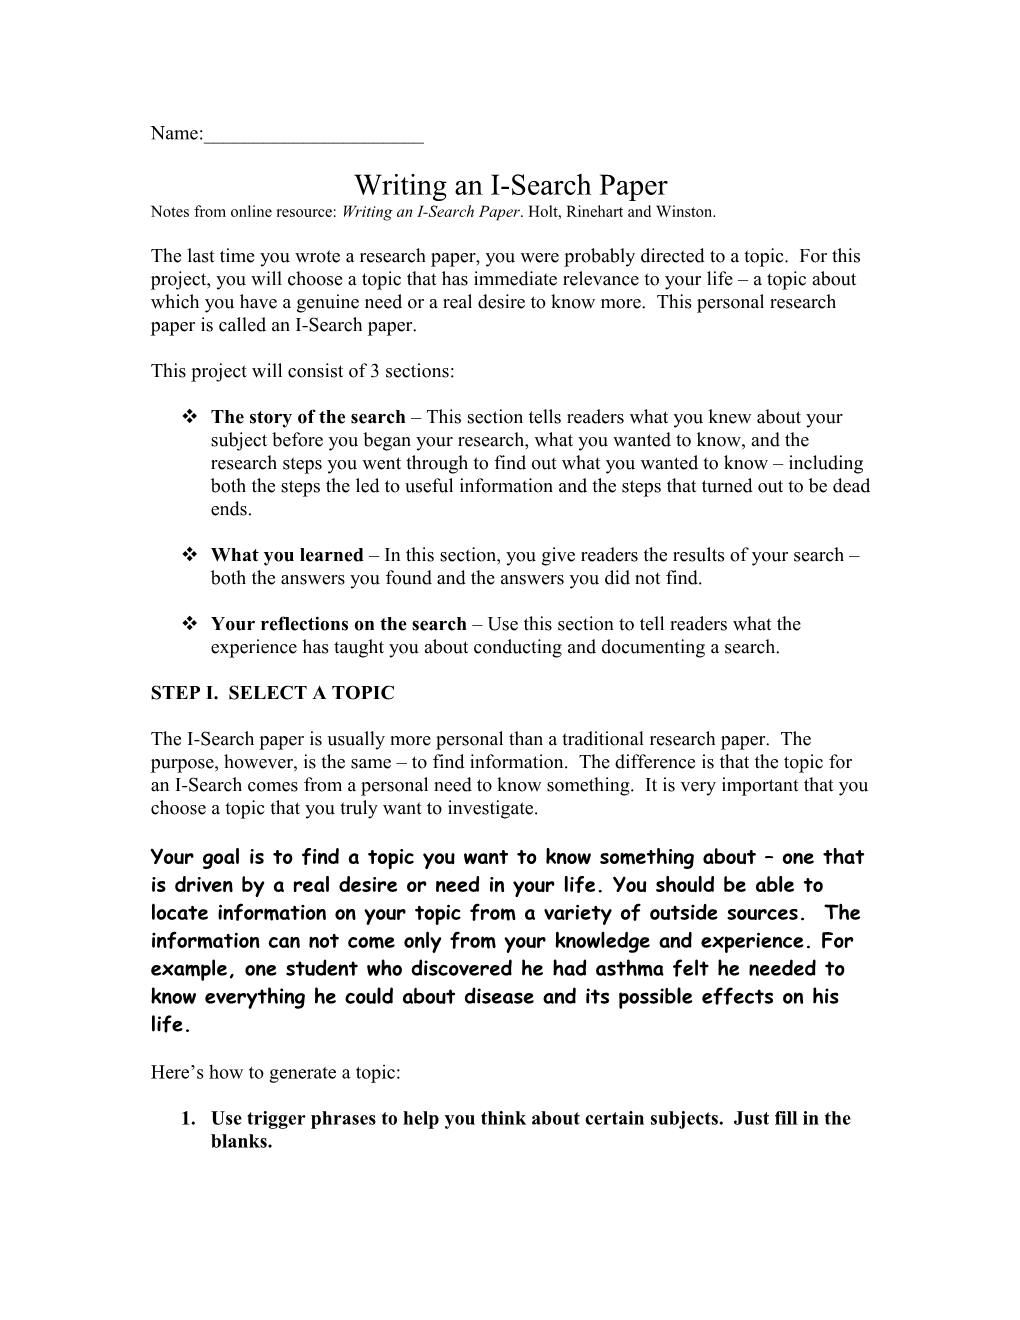 Writing an I-Search Paper